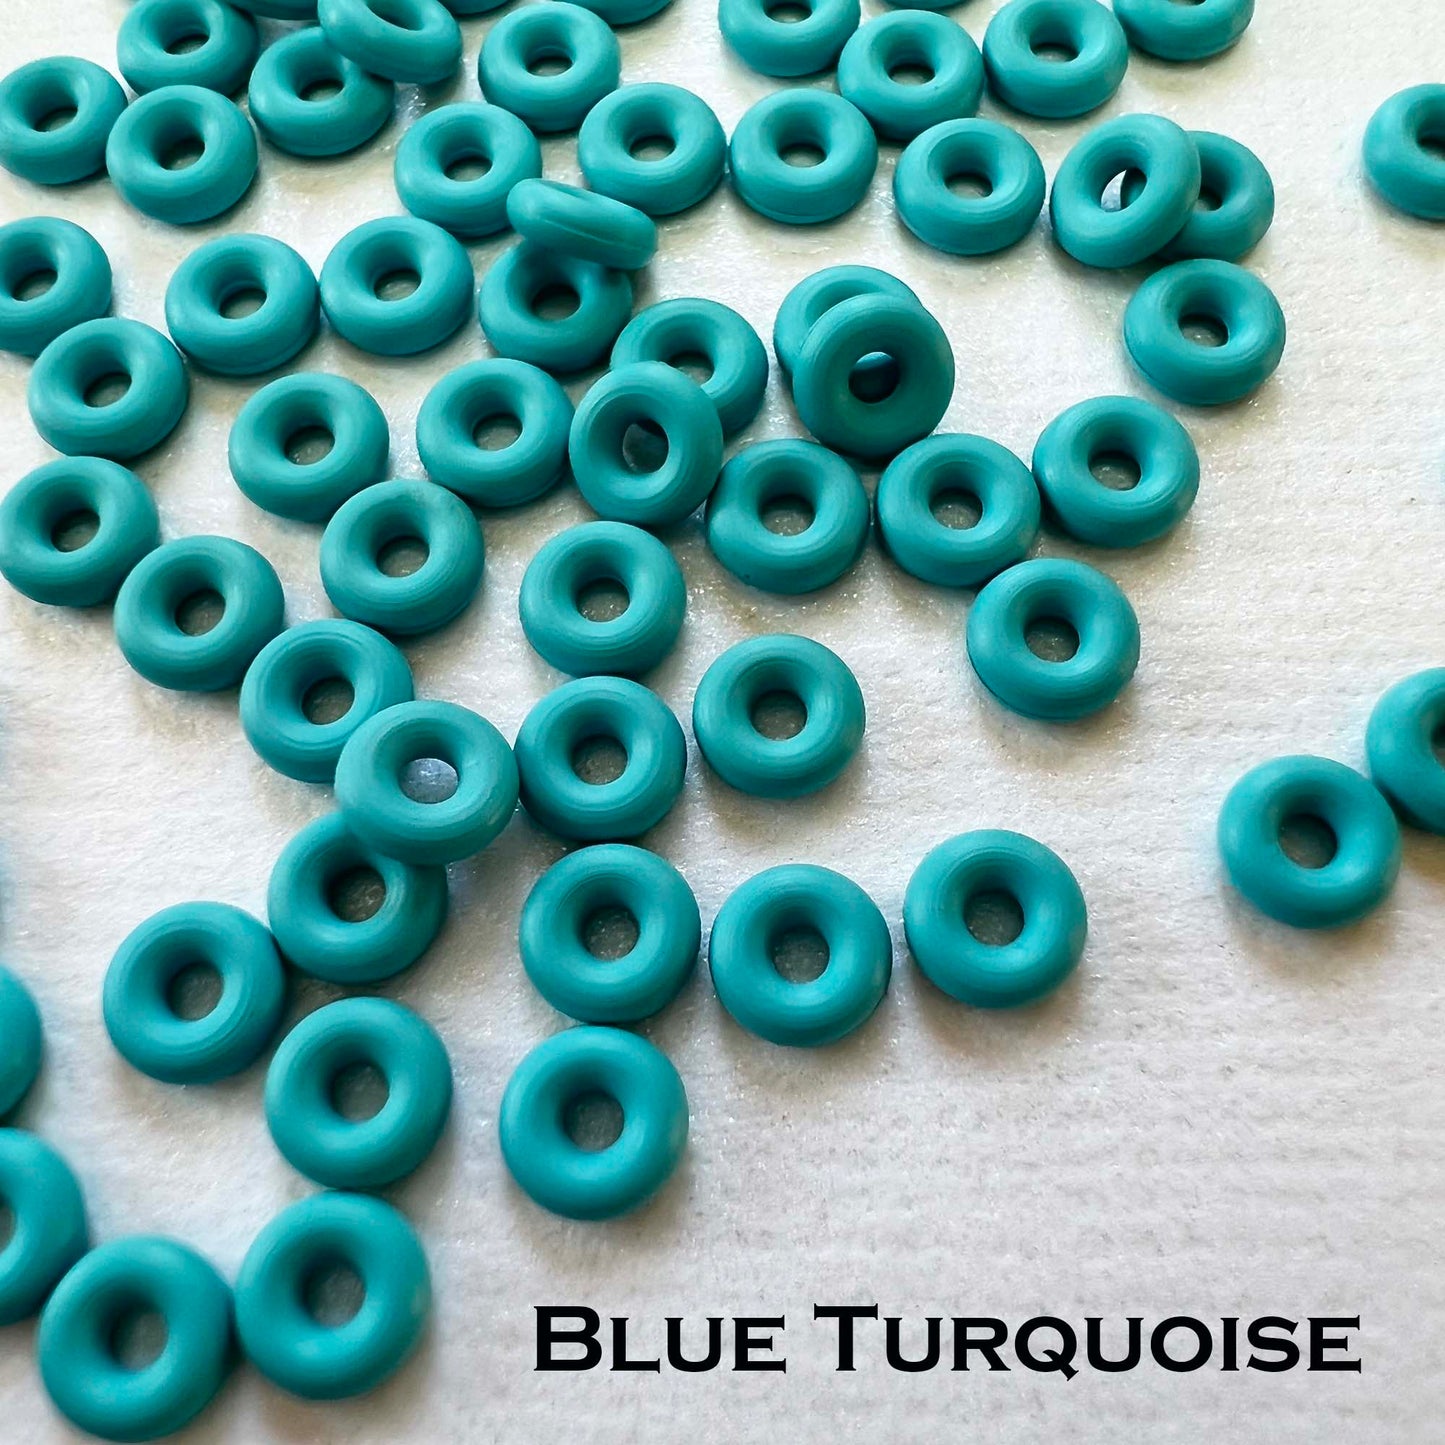 4.5mm Rubber O-Rings (ID: 1.5mm) - choose color/quantity